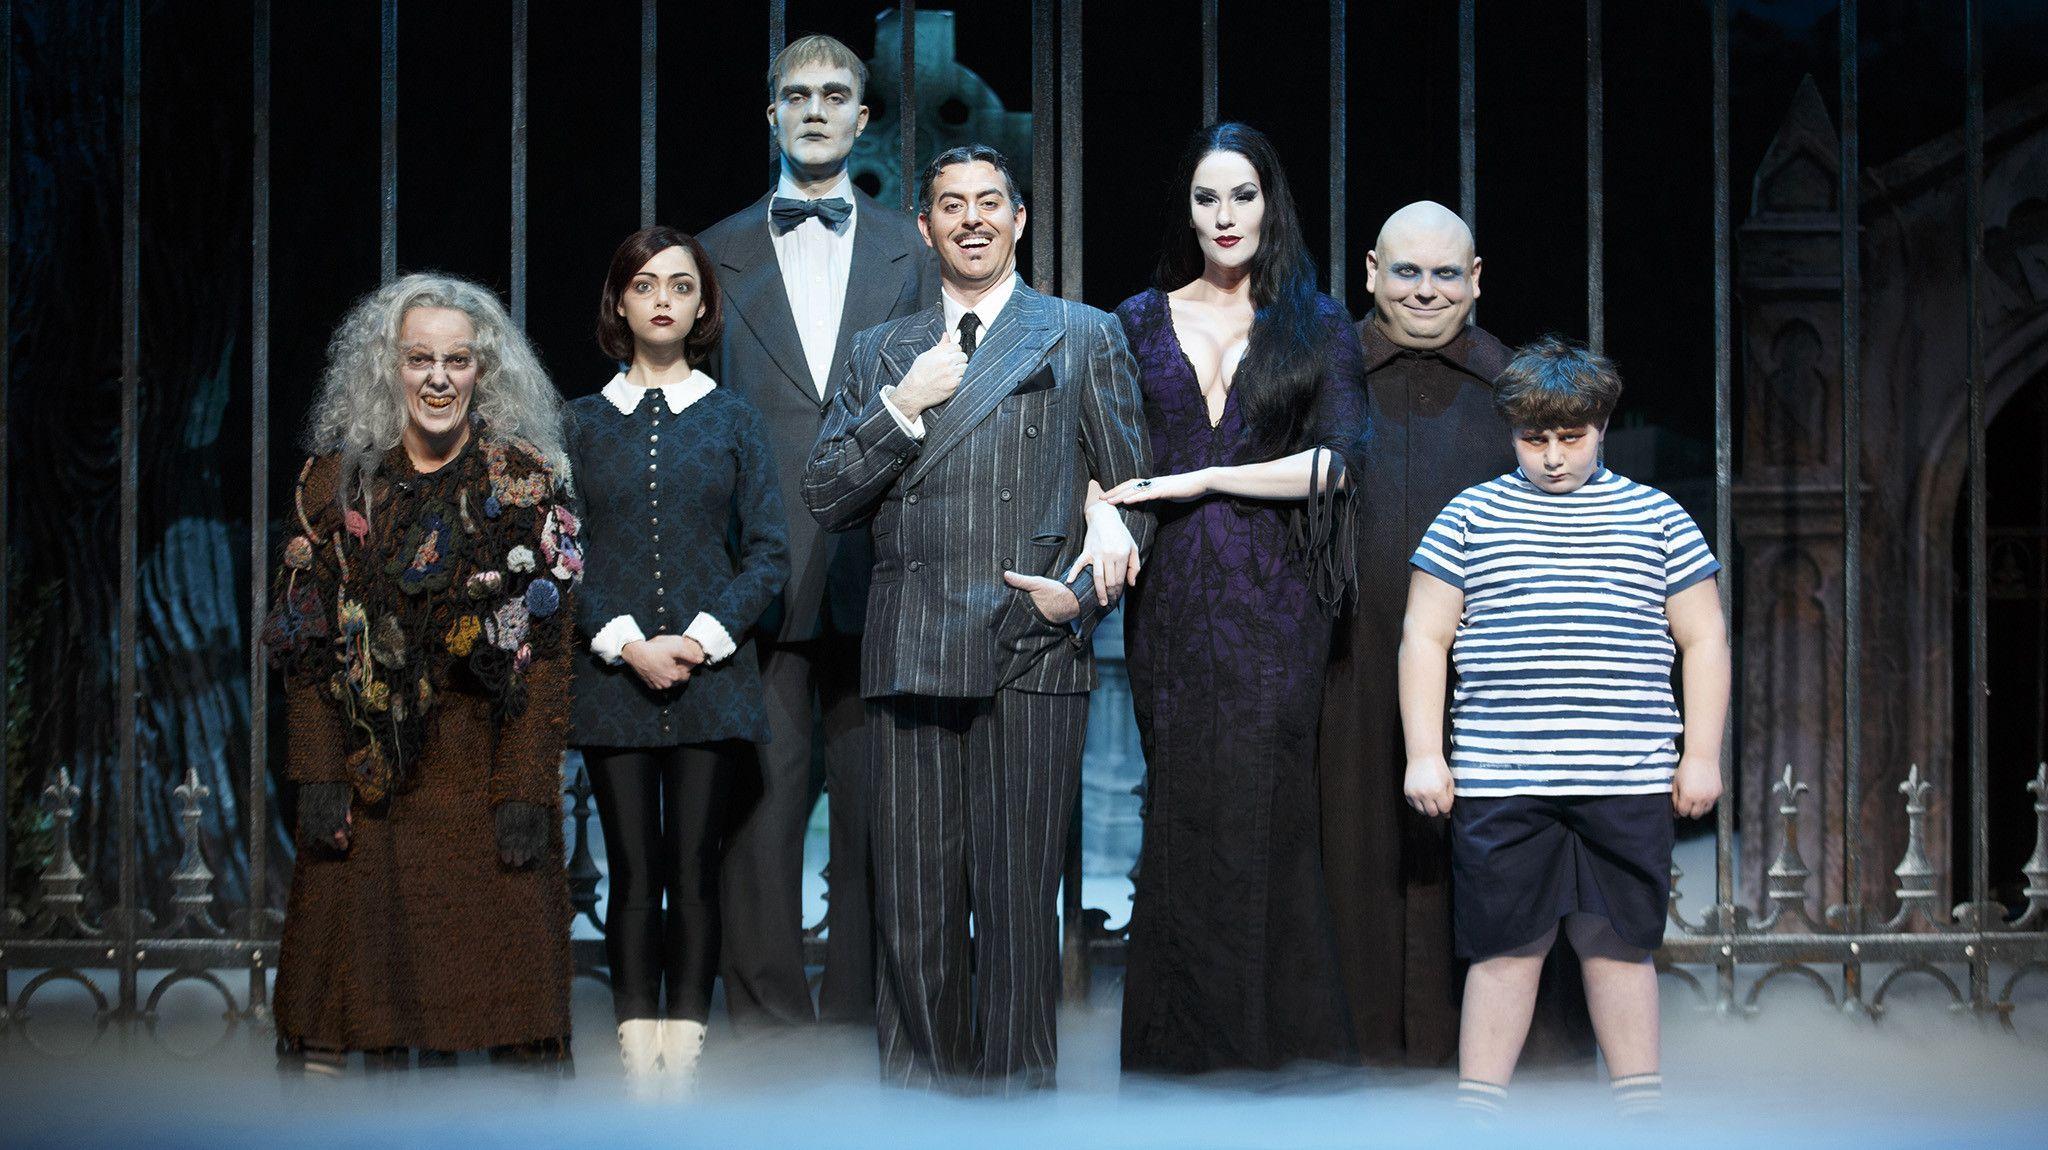 Addams Family Wallpapers